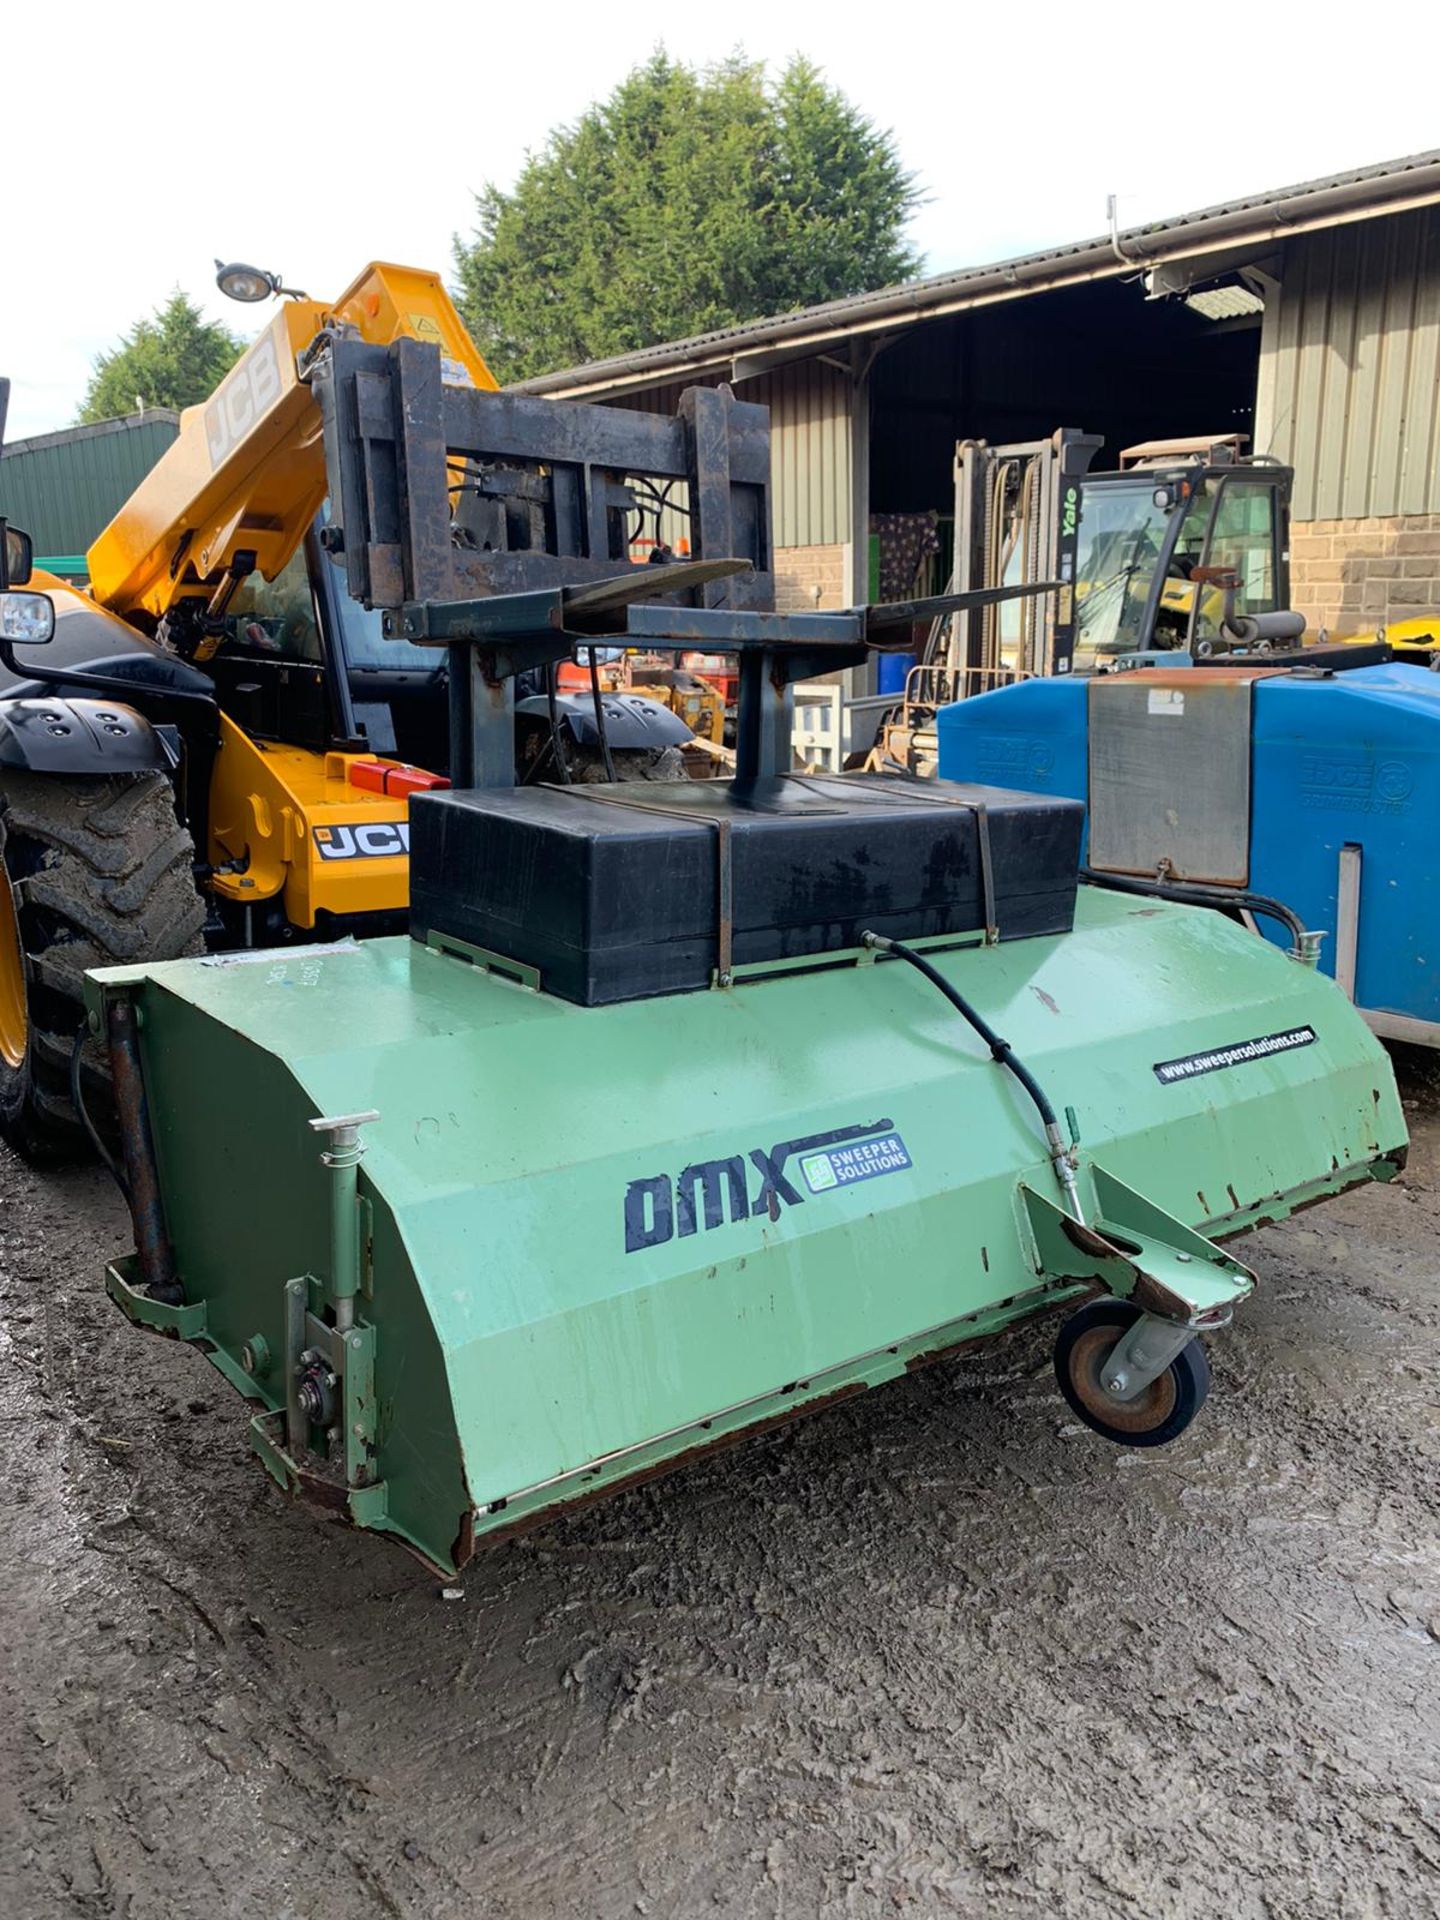 DMX SWEEPER SOLUTION SWEEPER BUCKET, ALL WORKS, CLEAN MACHINE, HYDRAULIC DRIVEN *PLUS VAT* - Image 6 of 6